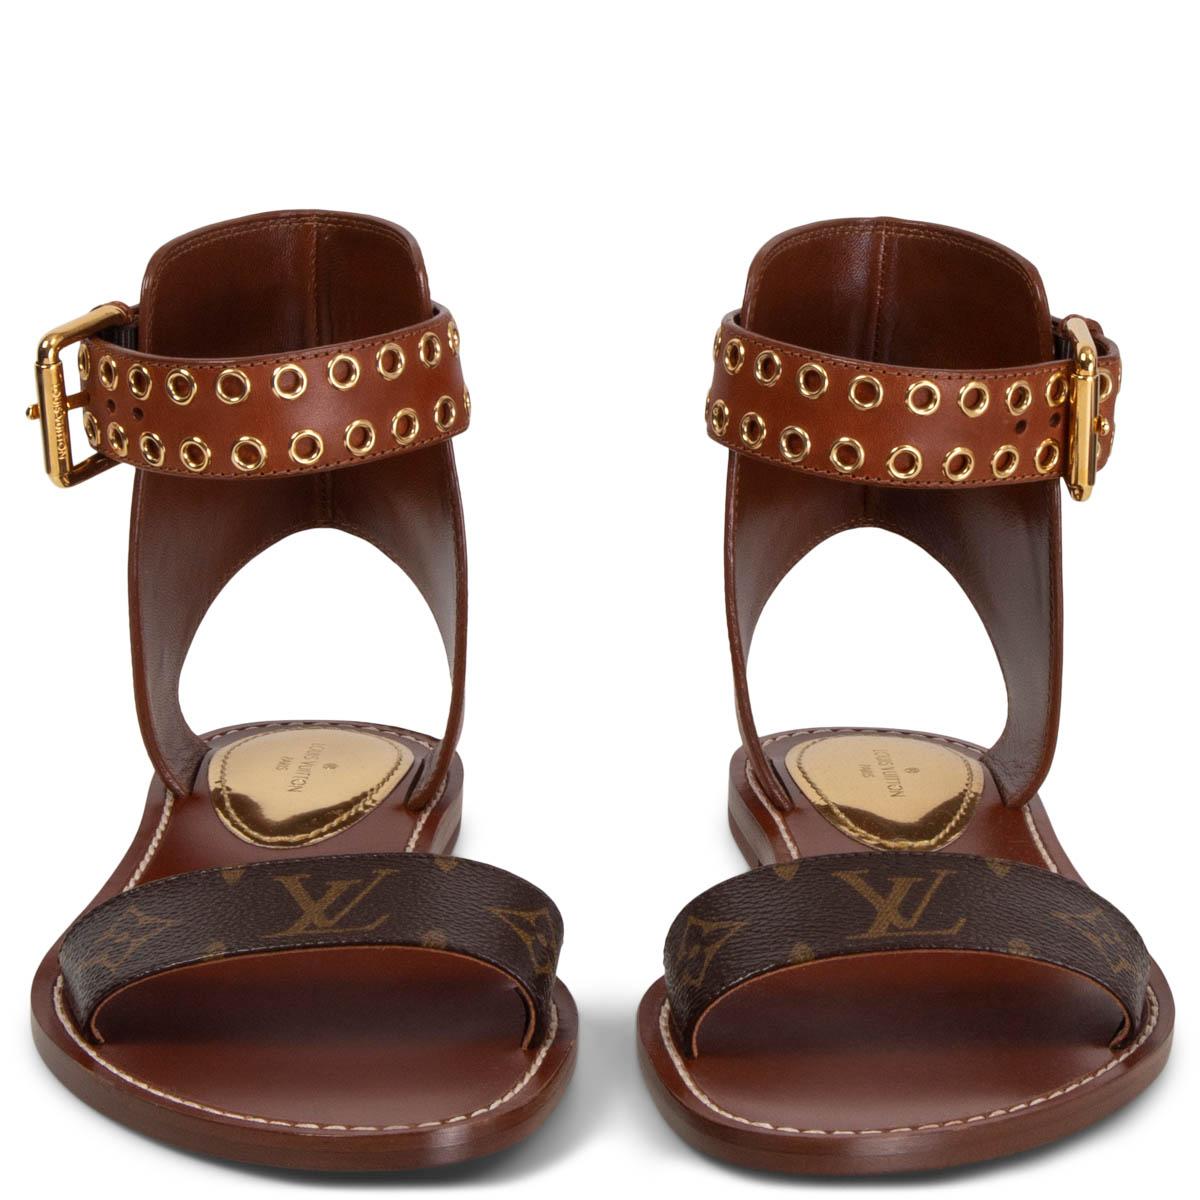 100% authentic Louis Vuitton Passenger flat sandals in monogram canvas and cognac calfskin featuring gold-tone ankle-strap buckle and eyelets. Brand new. 

Measurements
Imprinted Size	38
Shoe Size	38
Inside Sole	25cm (9.8in)
Width	8.5cm